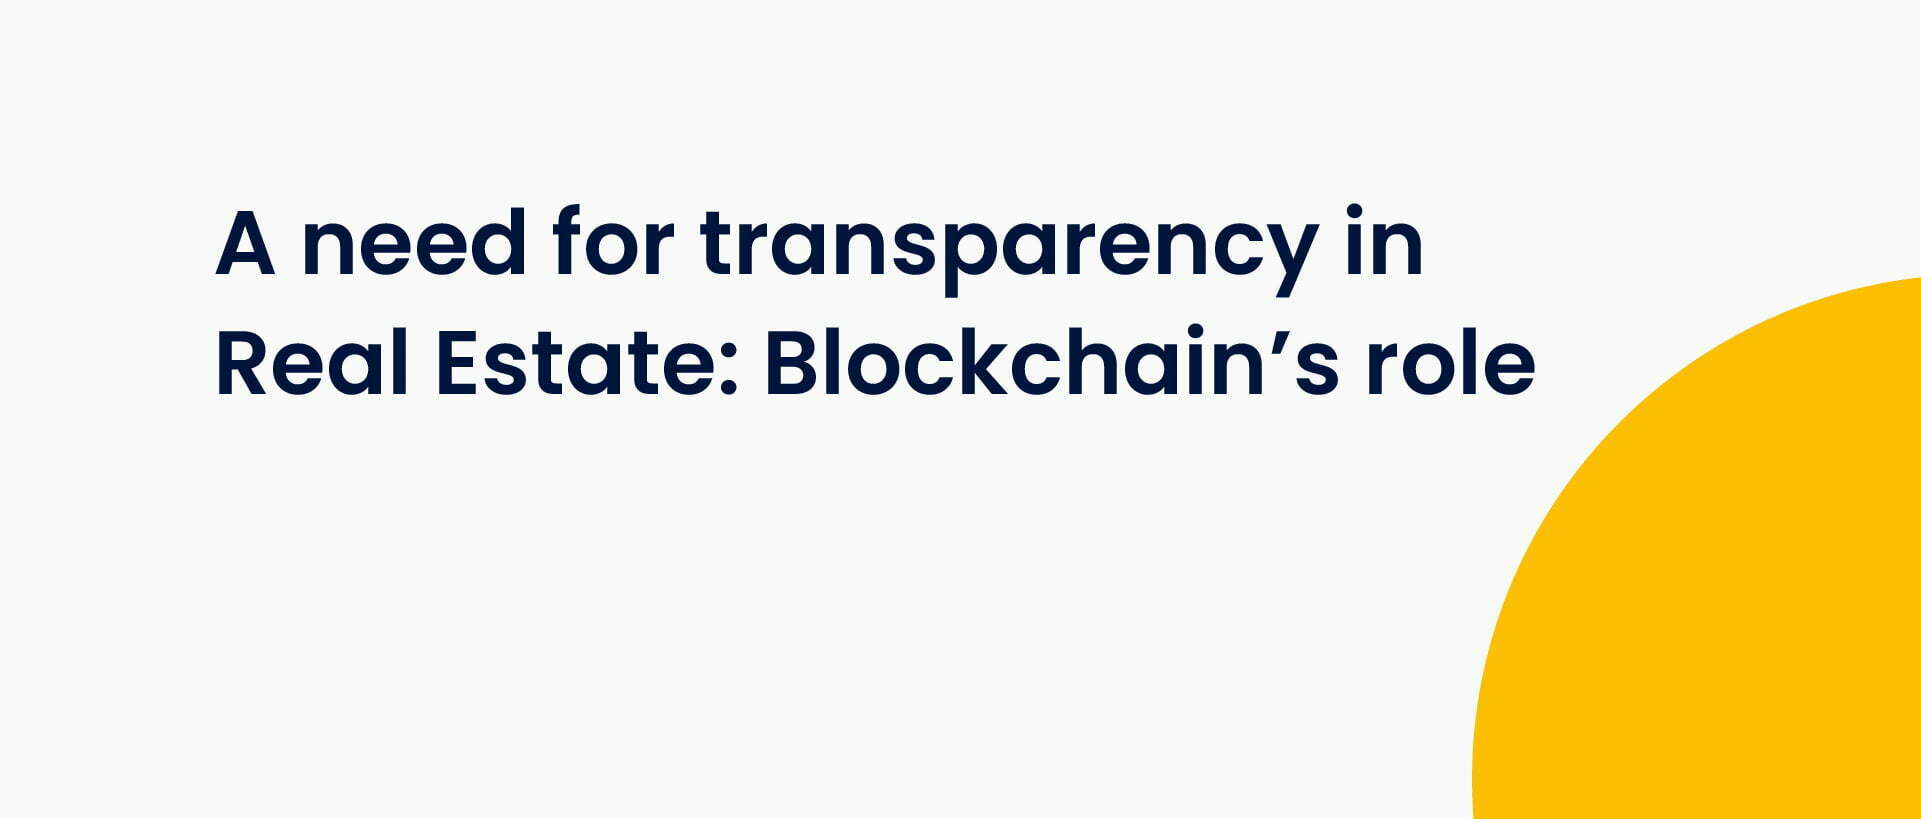 A Need for Transparency in Real Estate: Blockchain's Role